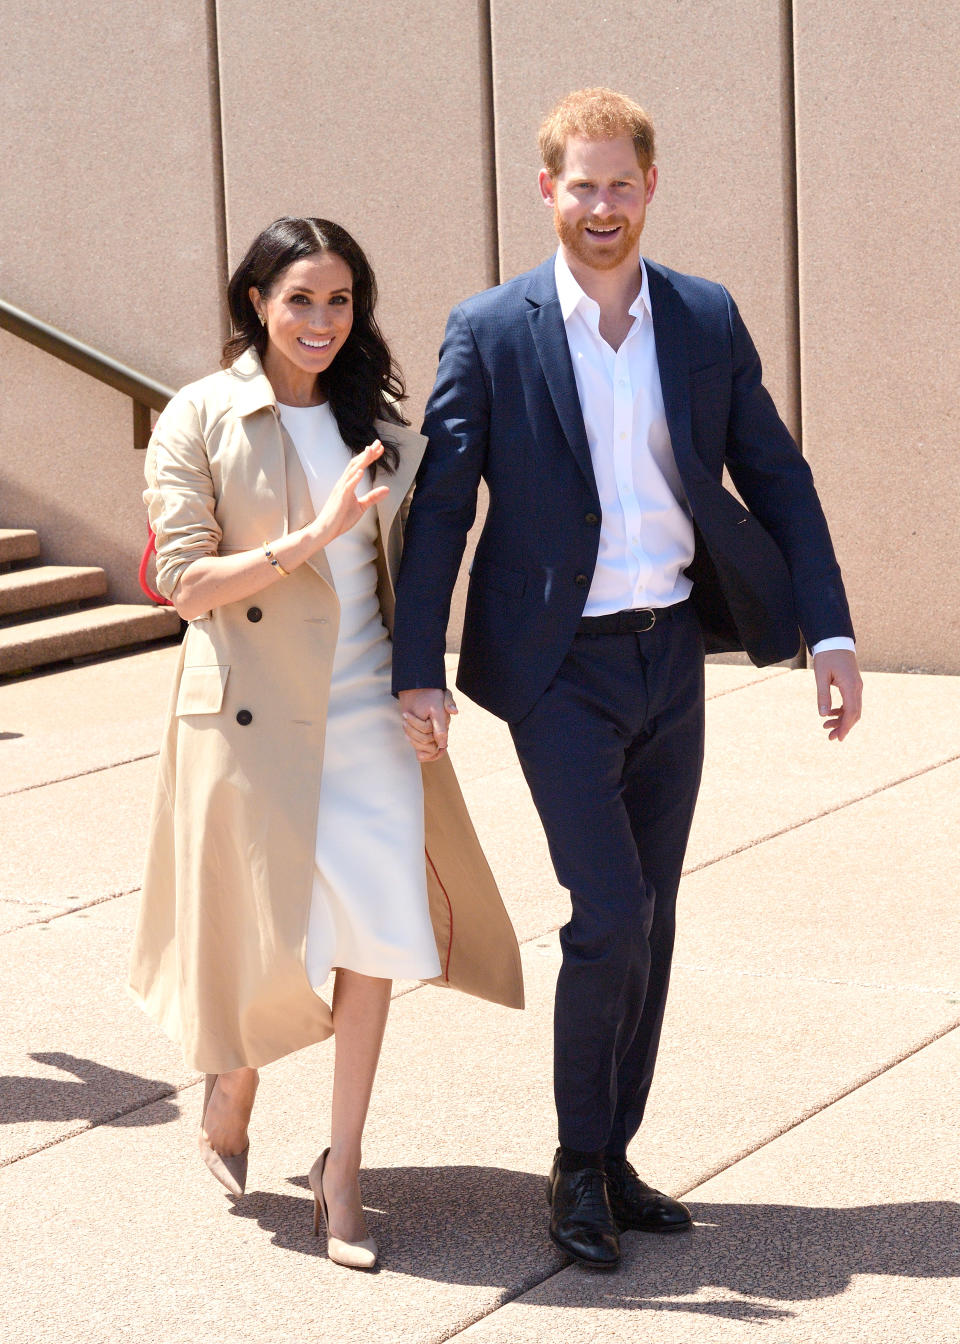  Prince Harry, Duke of Sussex and Meghan, Duchess of Sussex meet members of the public outside the Sydney Opera House on October 16, 2018 in Sydney, Australia. 